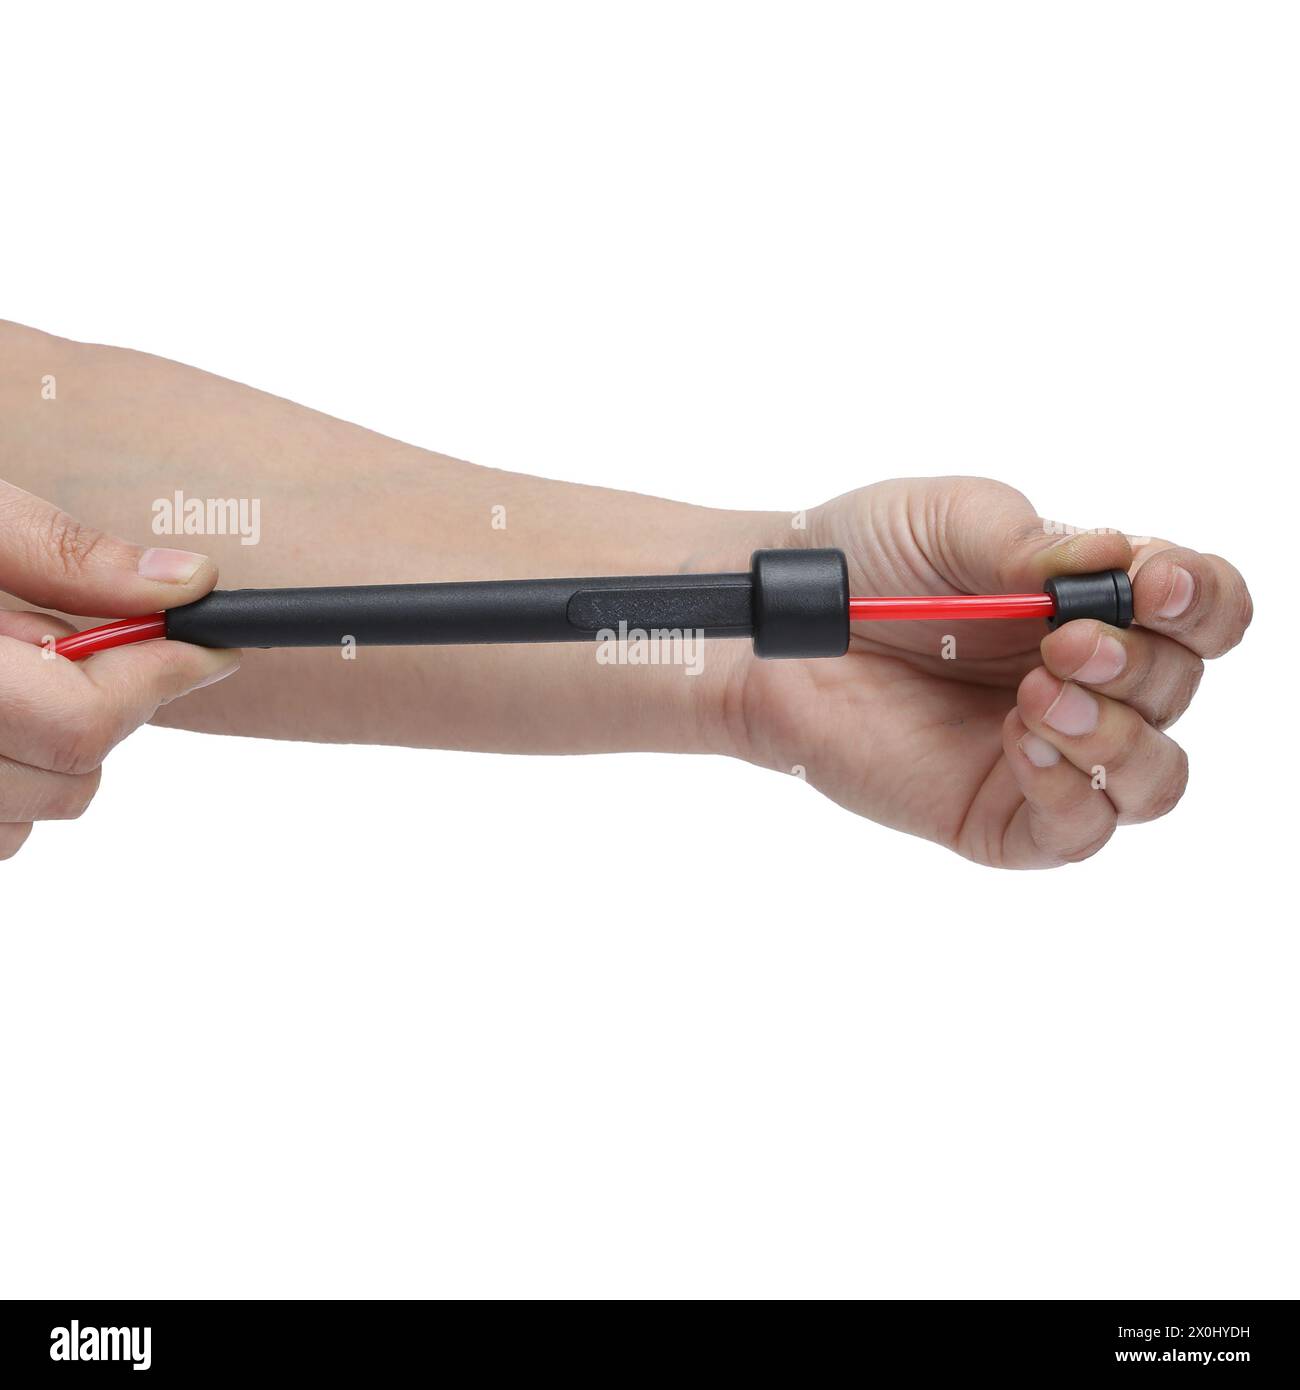 red black skipping rope hold in hand on white background Stock Photo